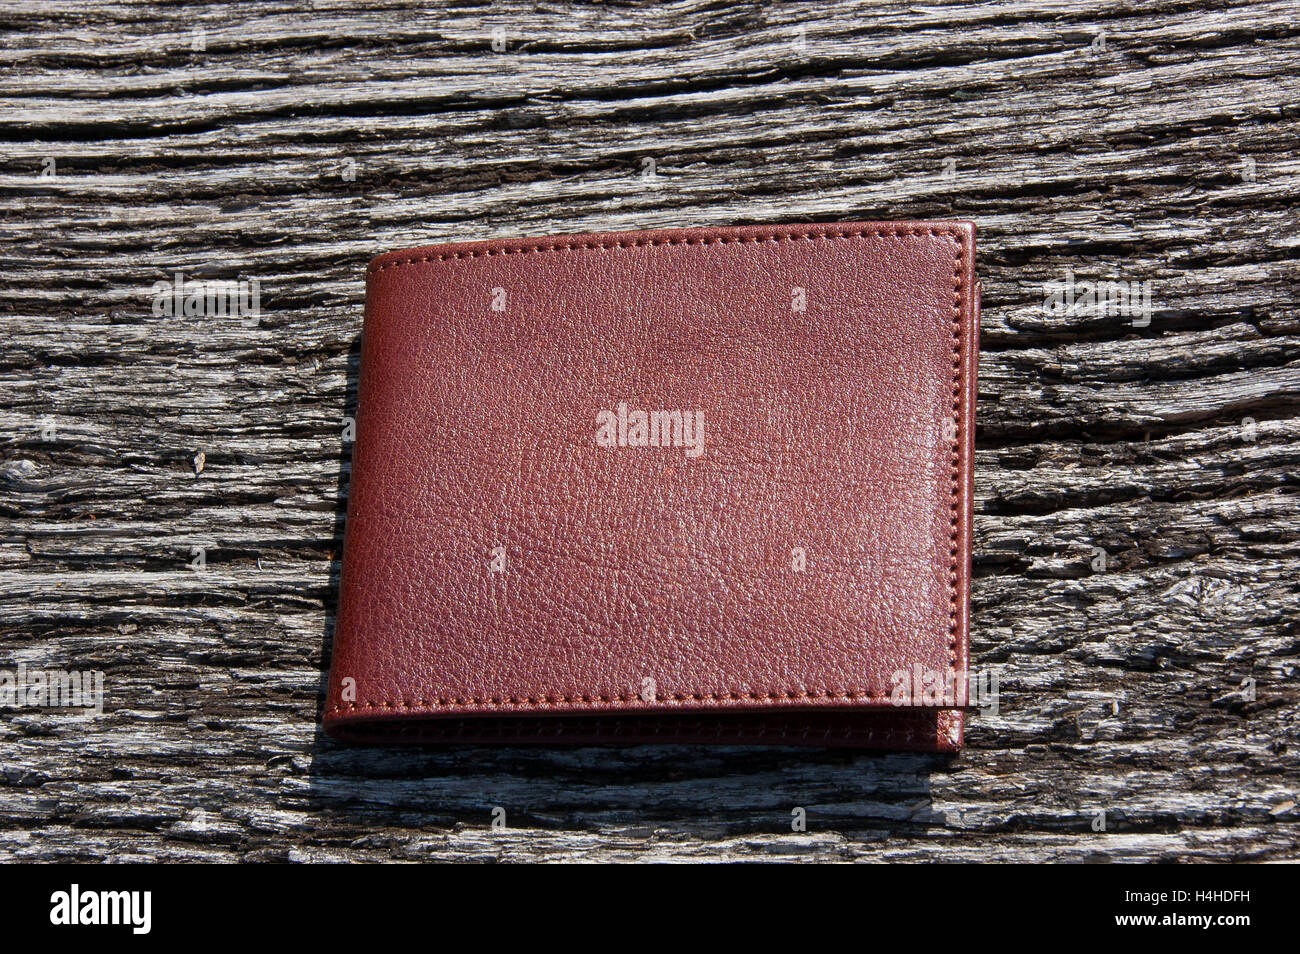 Leather wallets on a wooden table as background Stock Photo